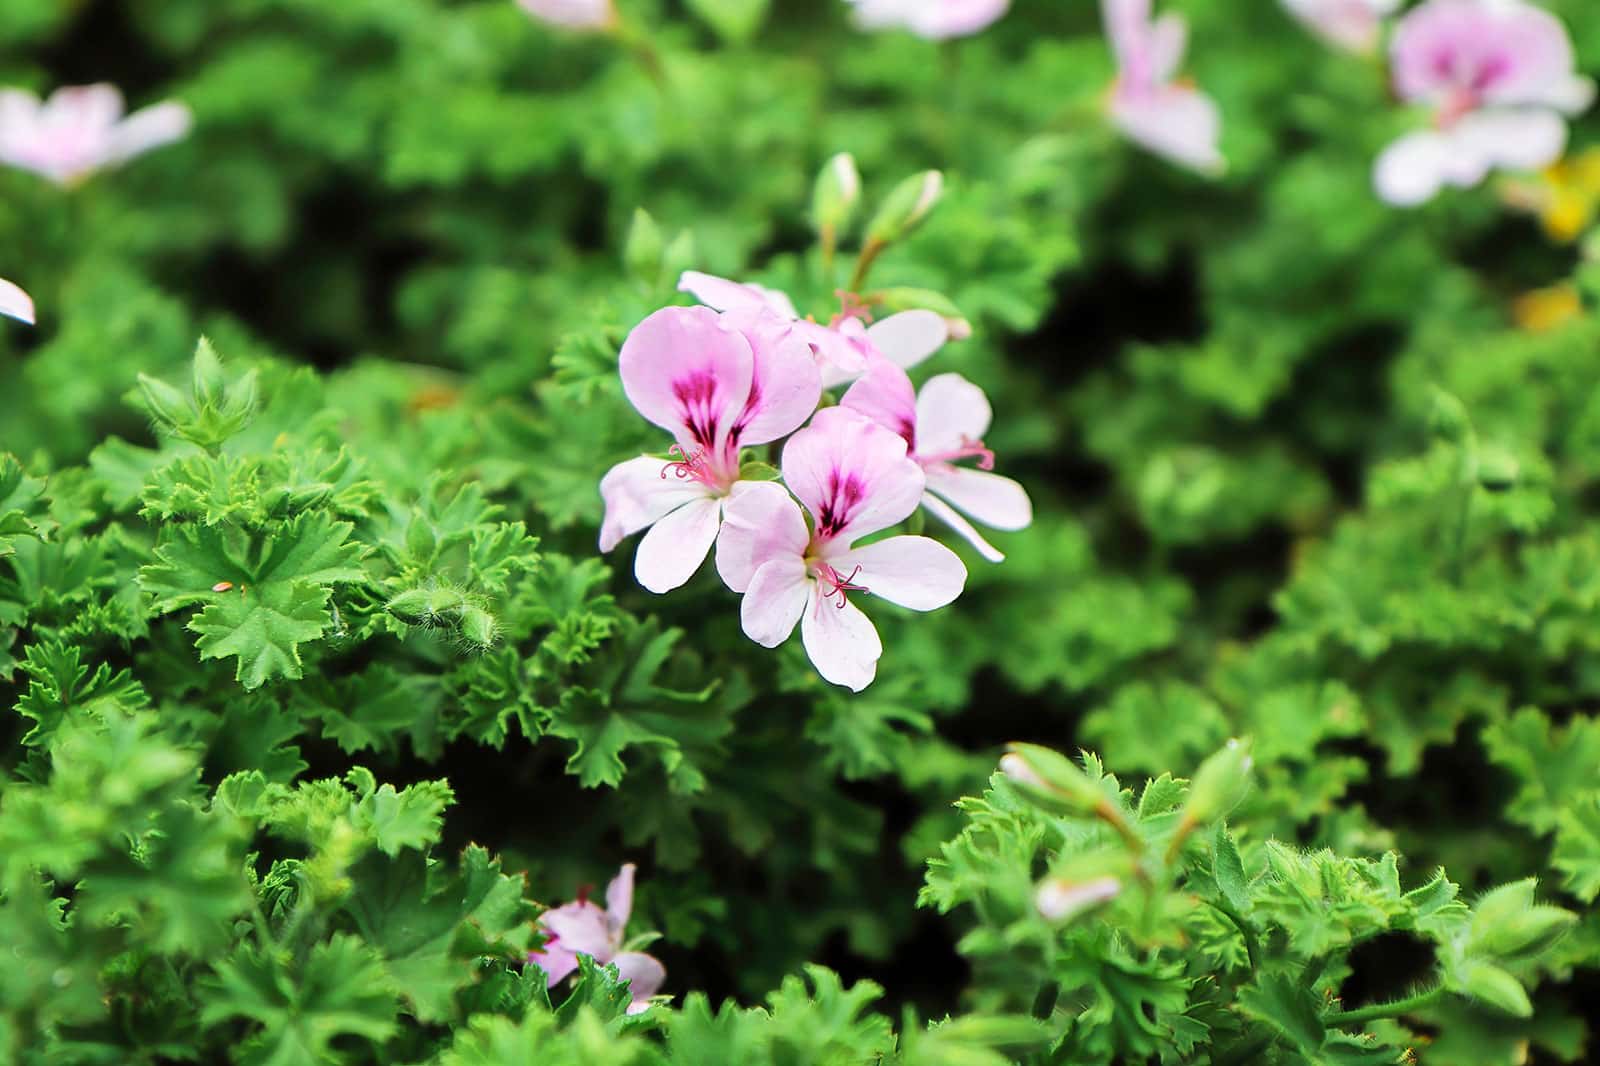 Citronella plant with small pink flowers